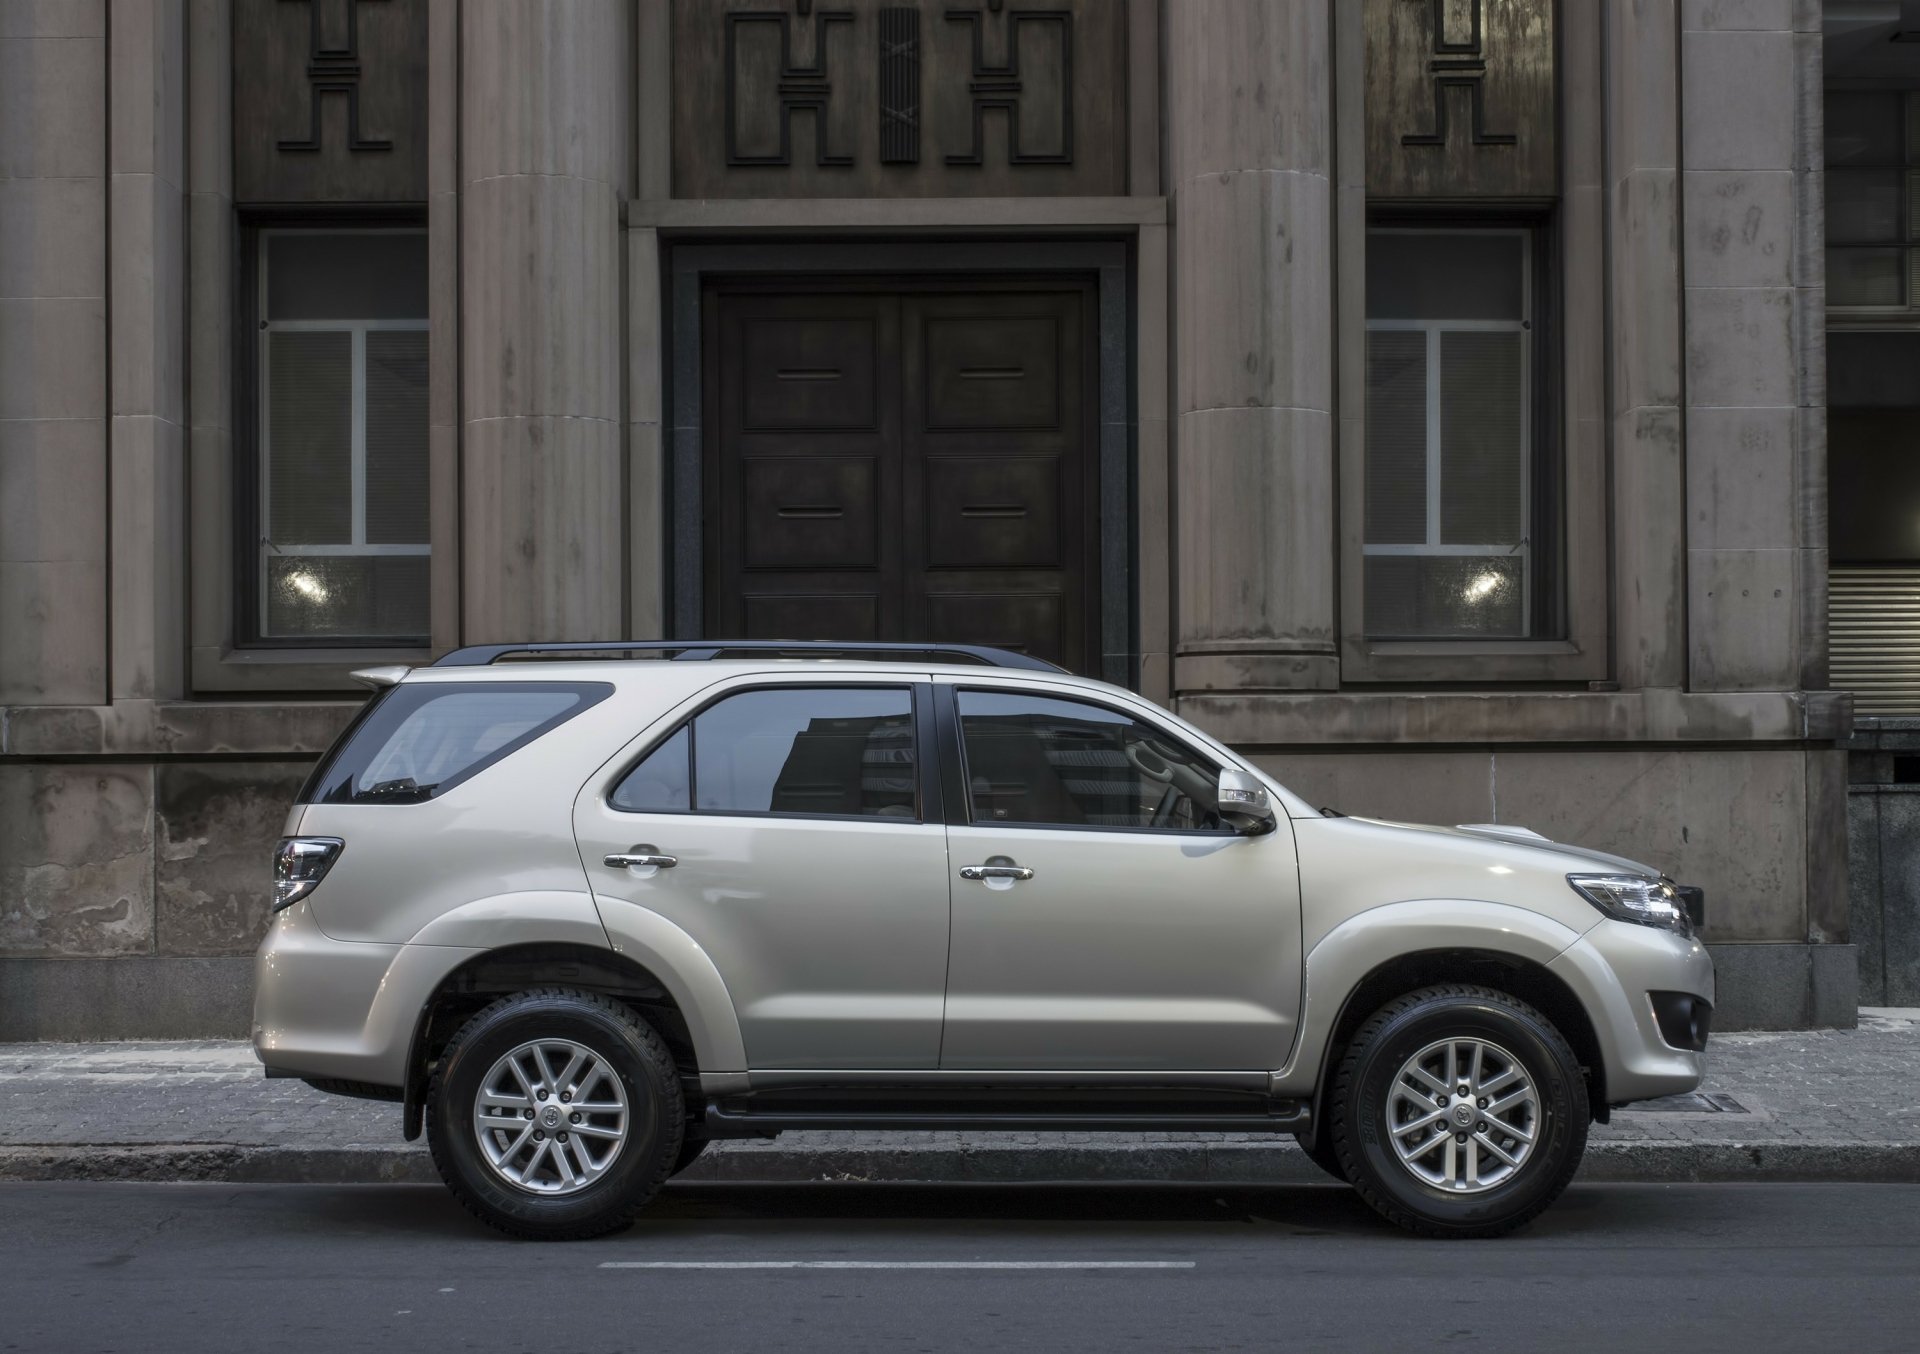 Toyota Fortuner Full HD Wallpaper and Background Image | 3000x2116 | ID